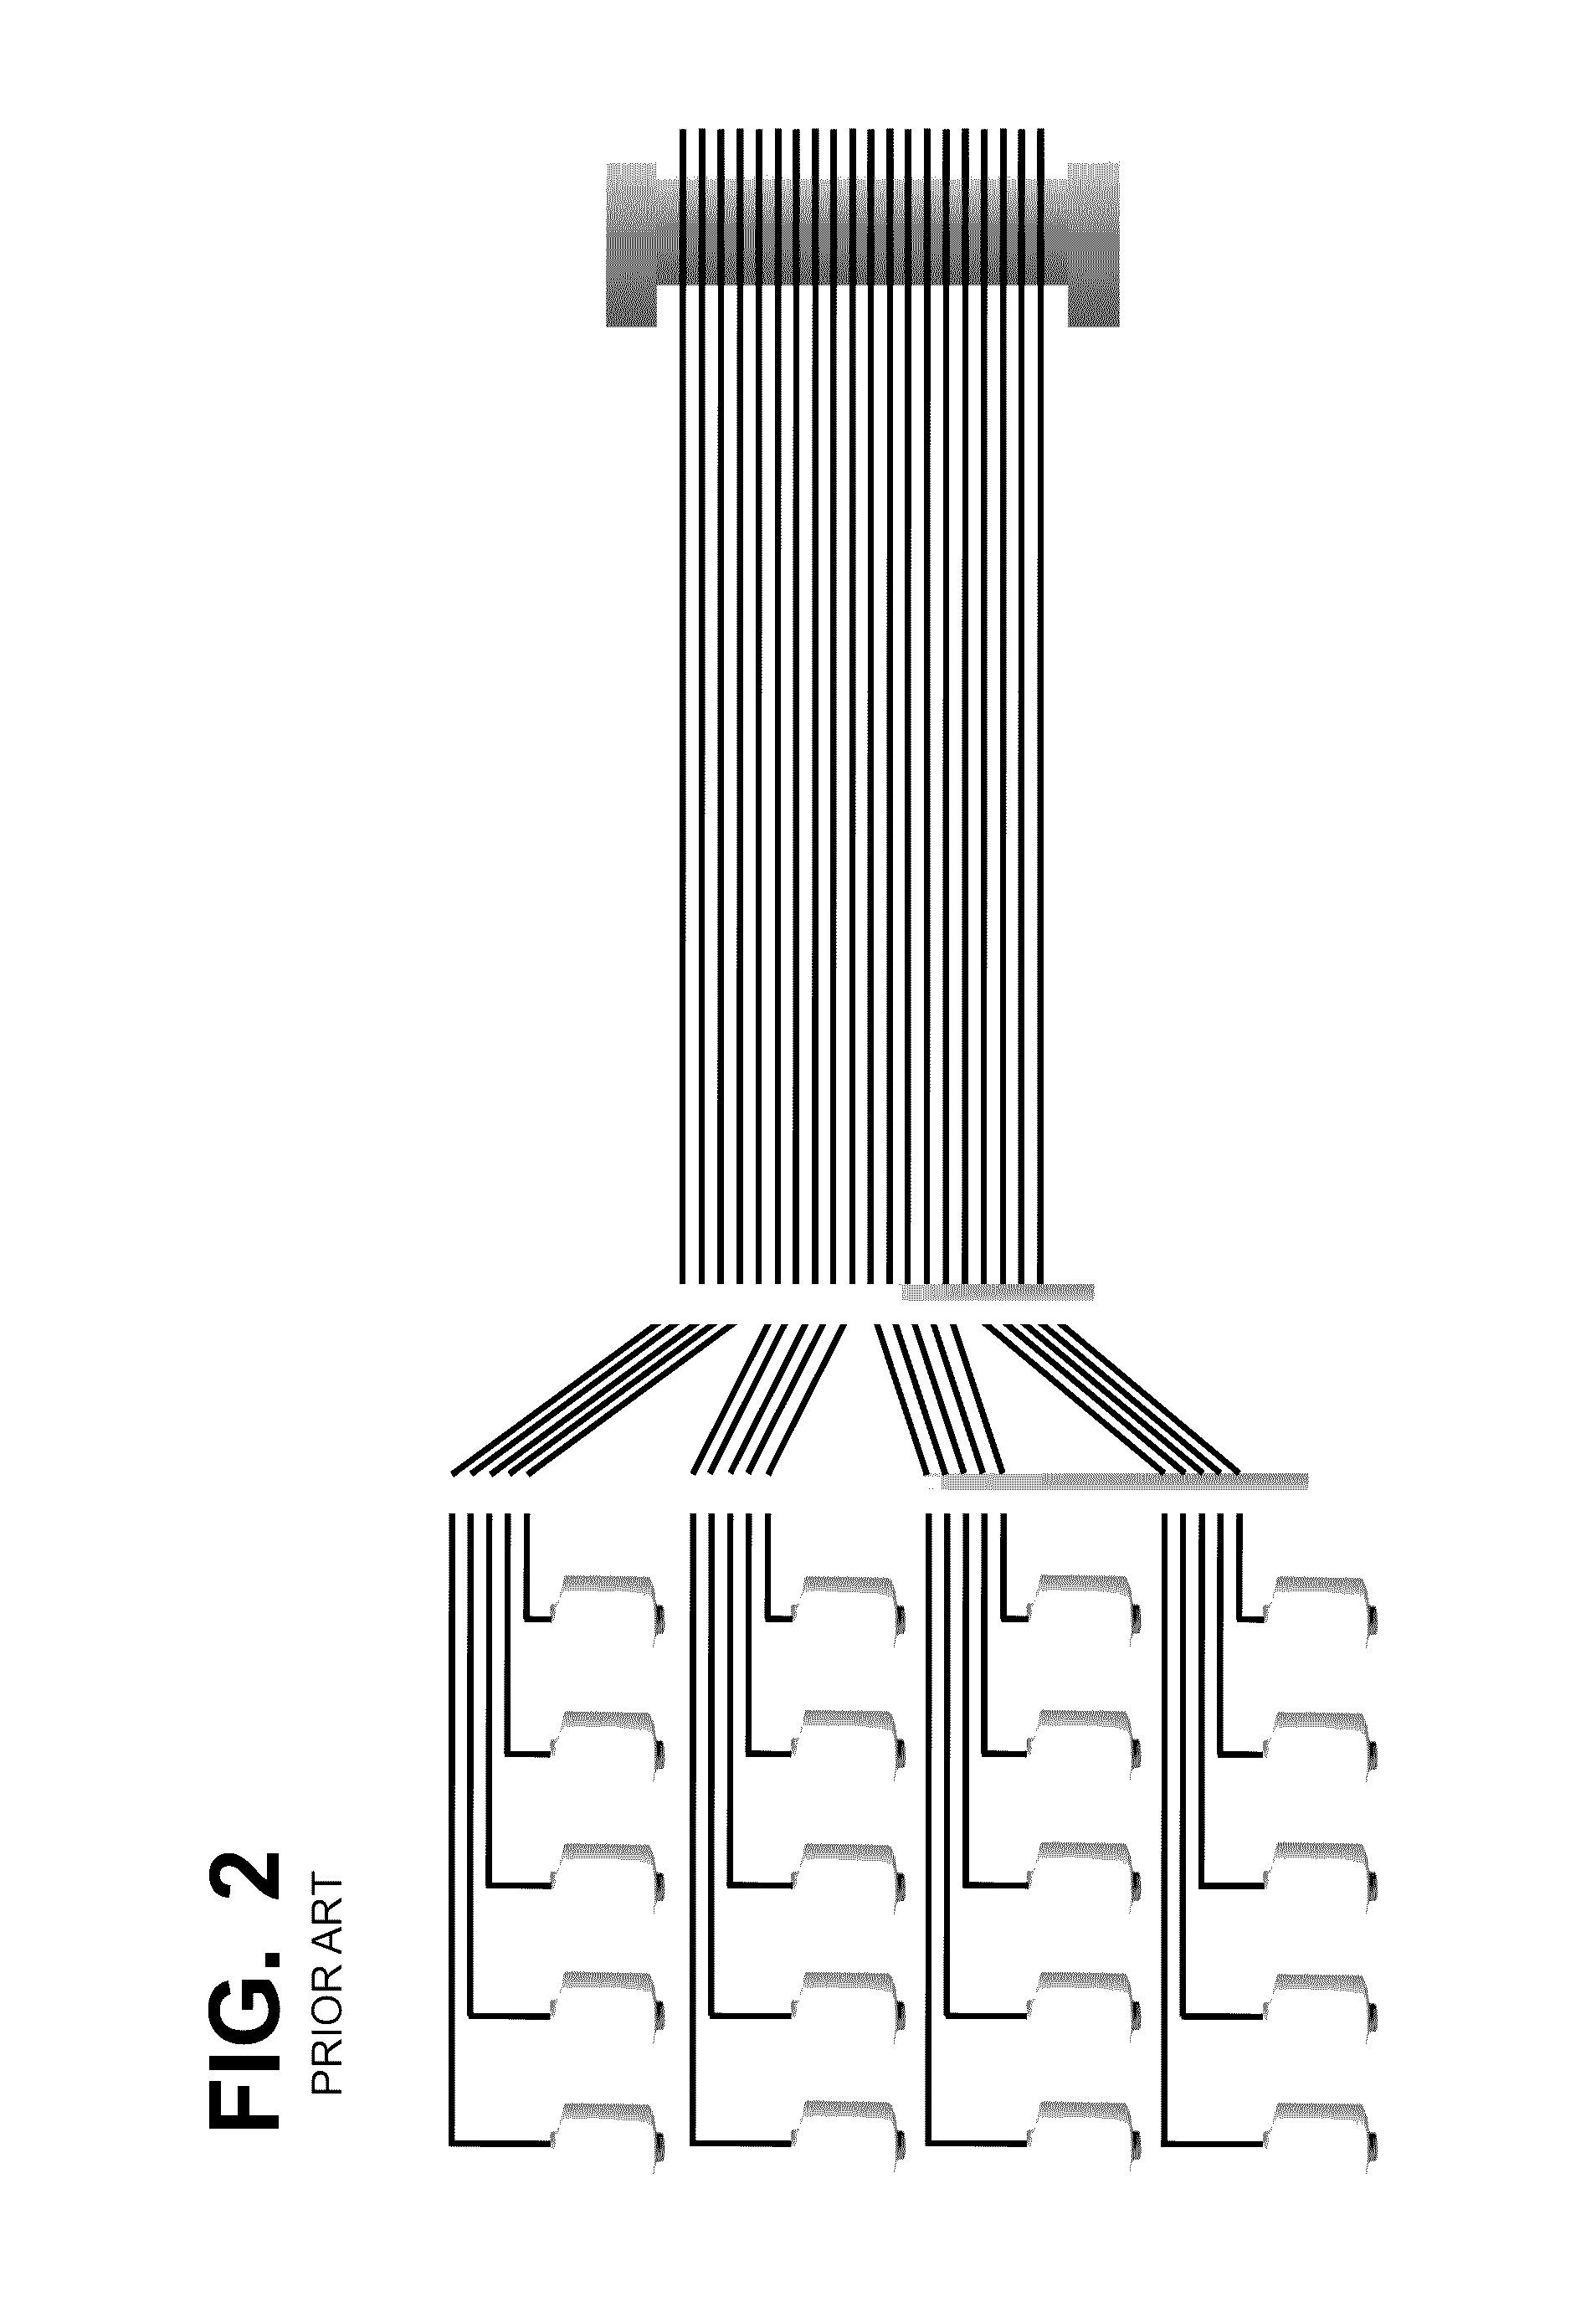 Systems and methods for manufacturing textiles